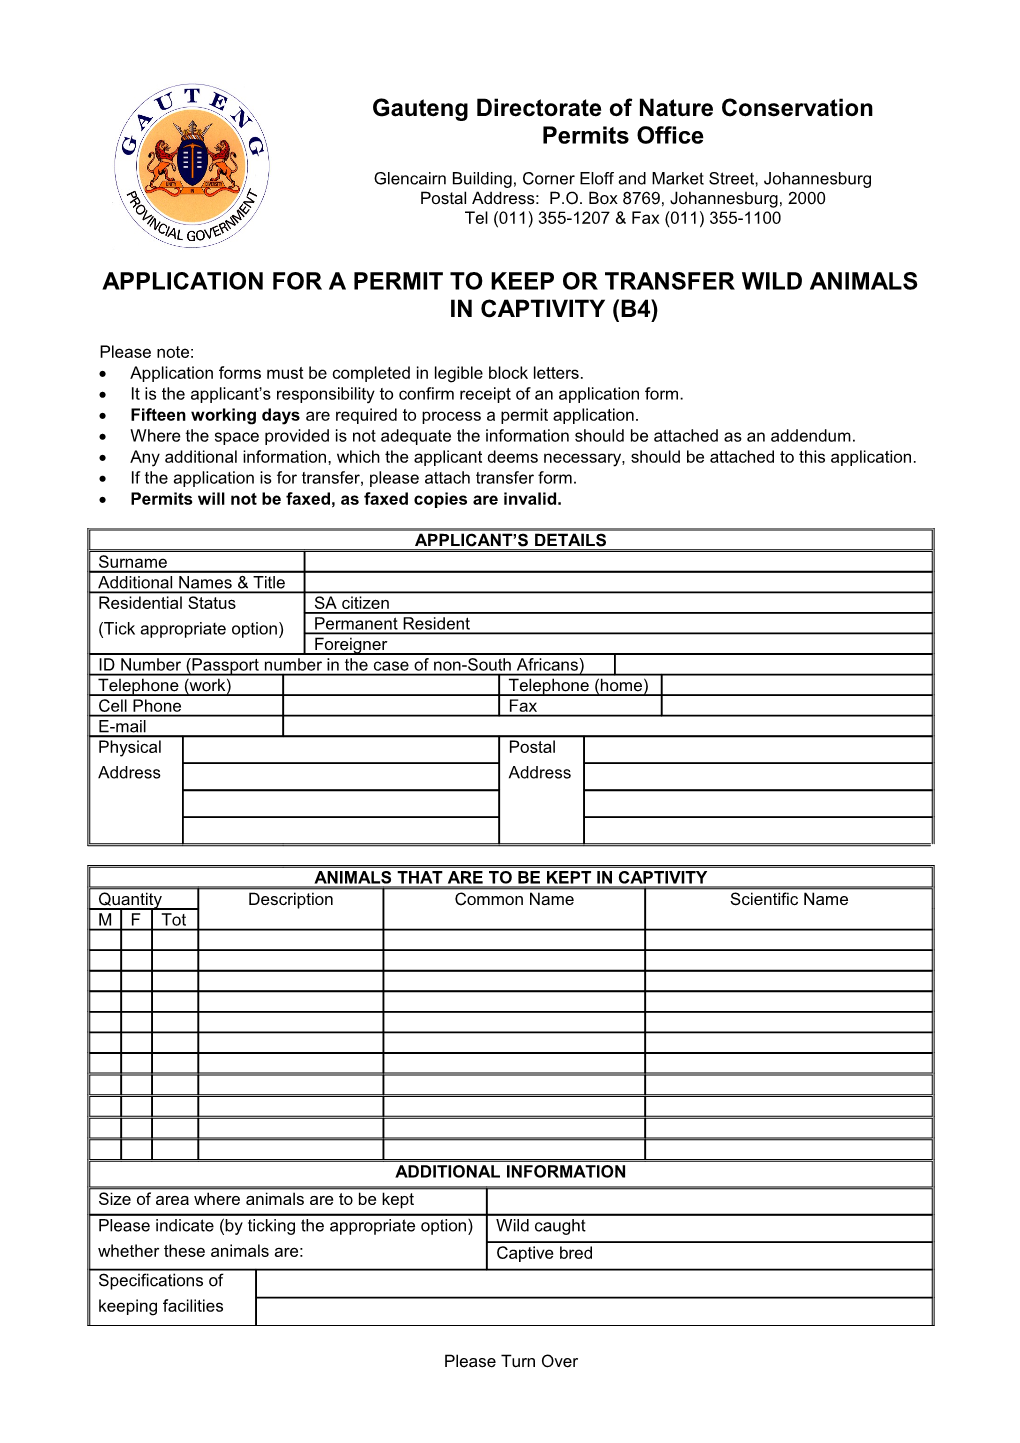 Application for a Permit to Keep Or Transfer Wild Animals in Captivity (B4)